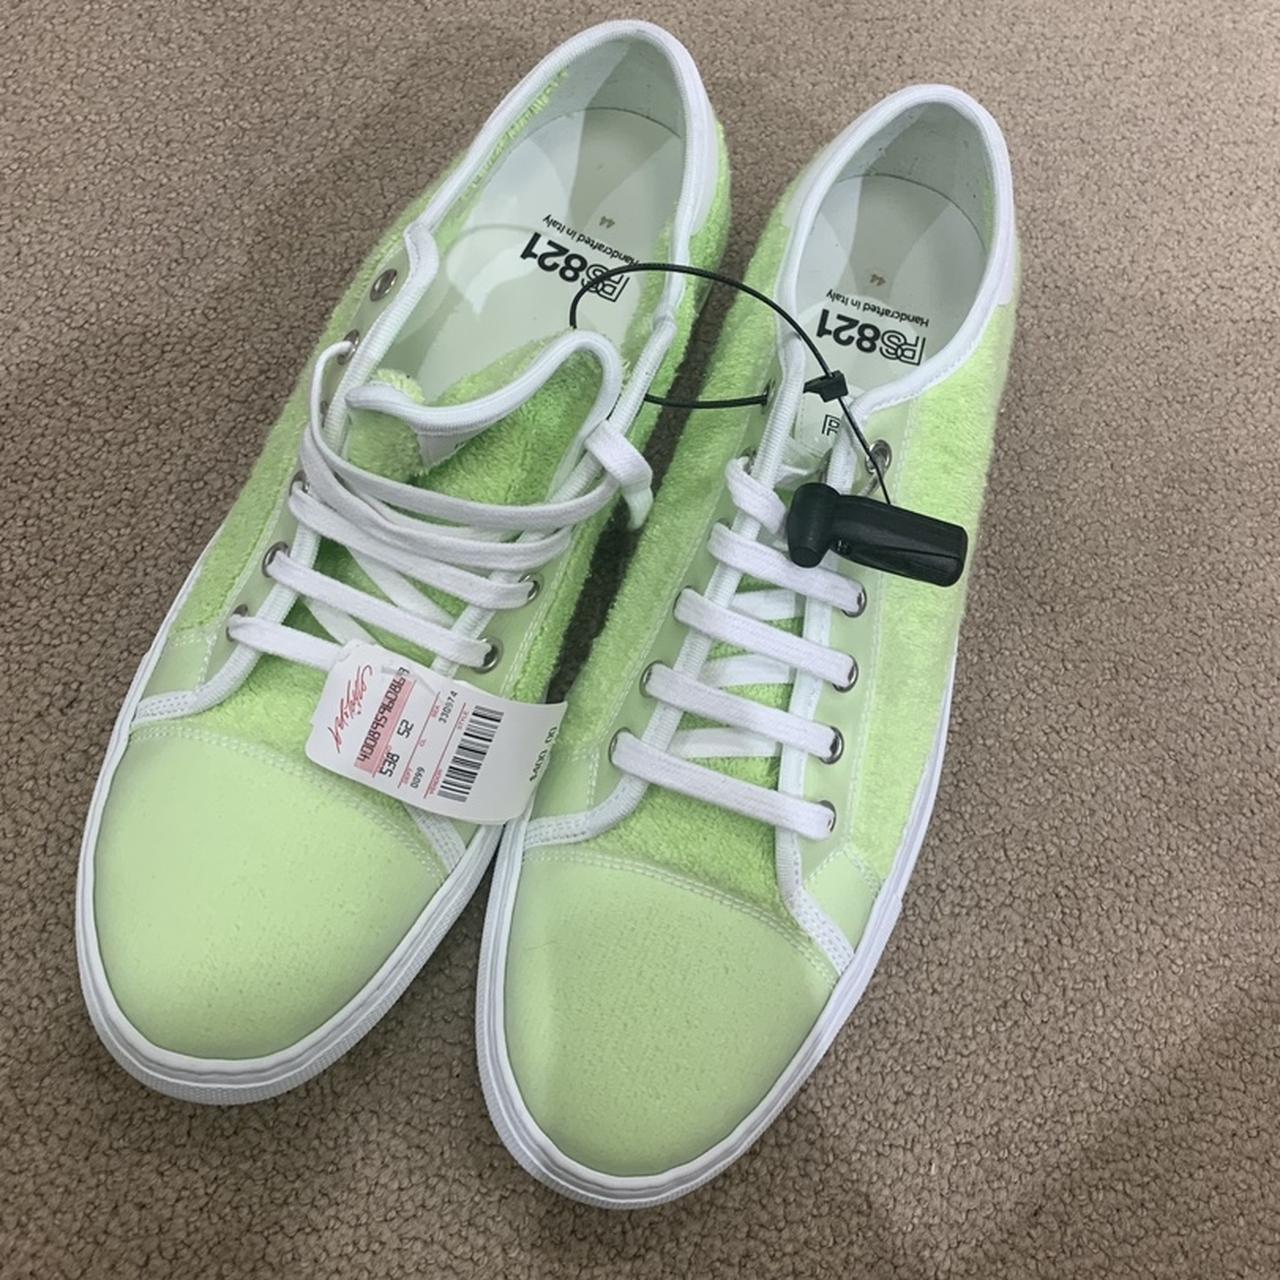 Alexander Wang Men's Green and White Trainers